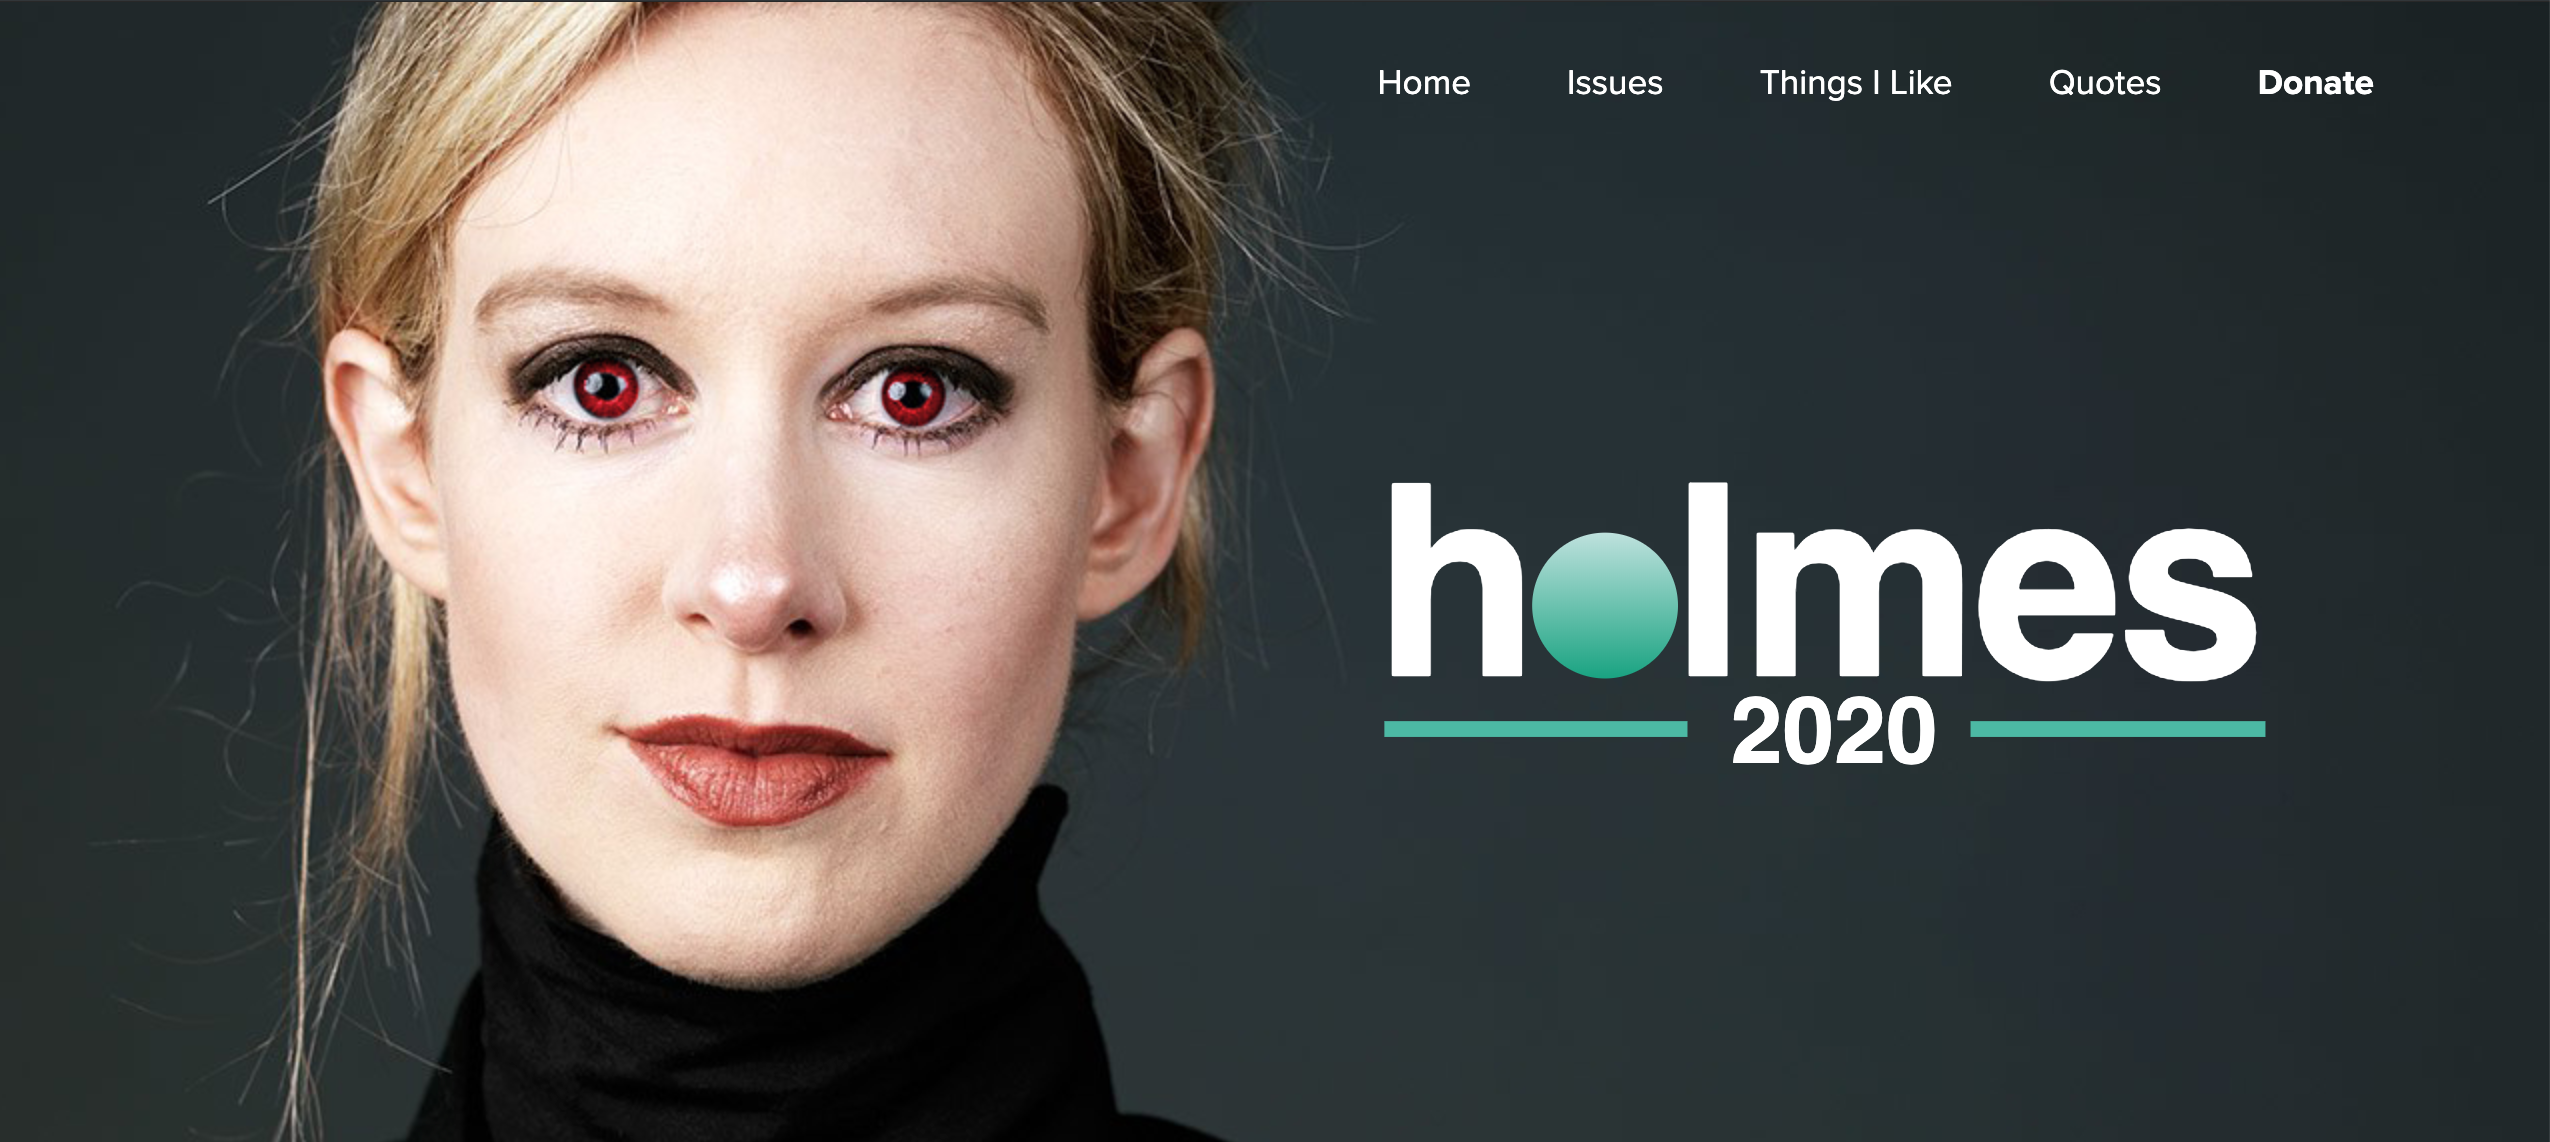 I’m Elizabeth Holmes, CEO and founder of Theranos, and I’m running for pres...